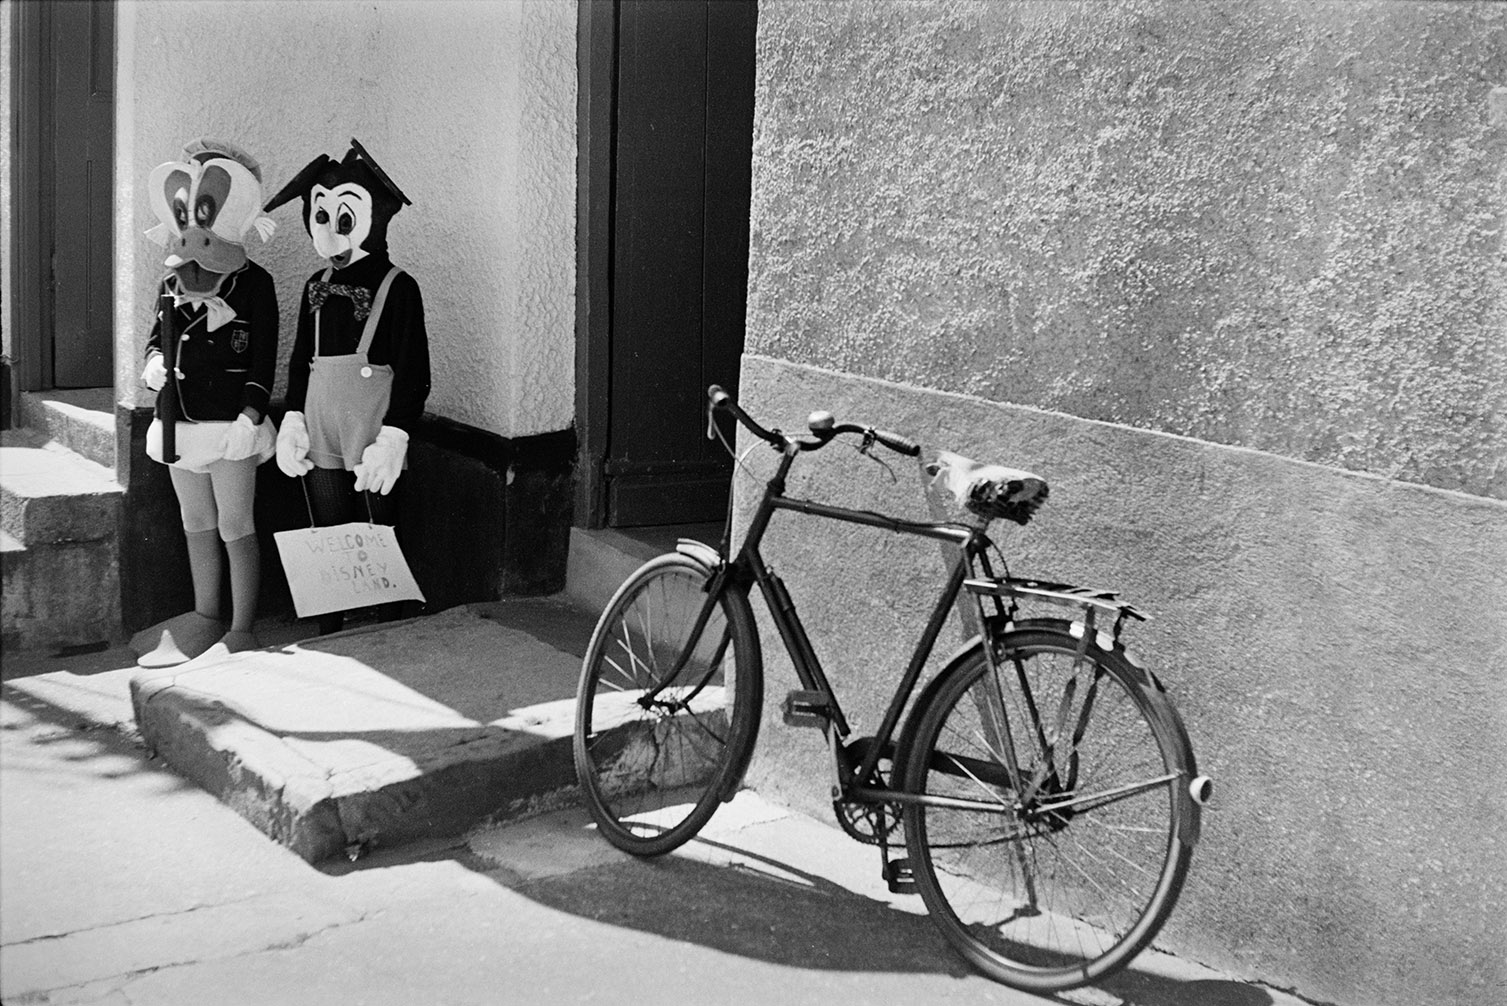 Two children in fancy dress Disney characters Micky Mouse and Donald Duck at Winkleigh Fair. They are stood by a doorway with a bicycle propped up outside.